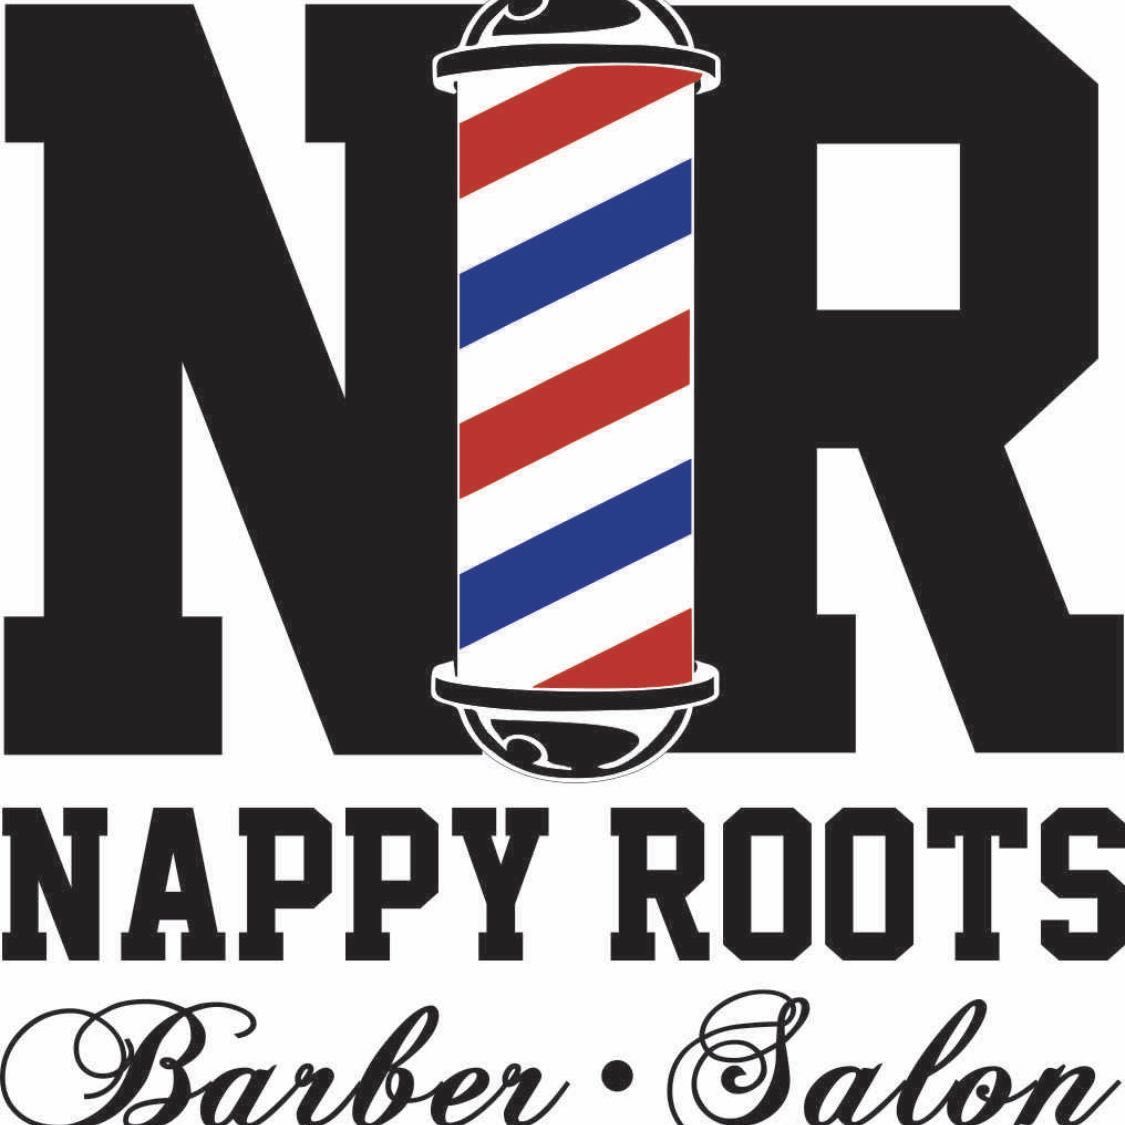 Nappy Roots, 7001 Indiana Ave suite 2, Riverside, 92506